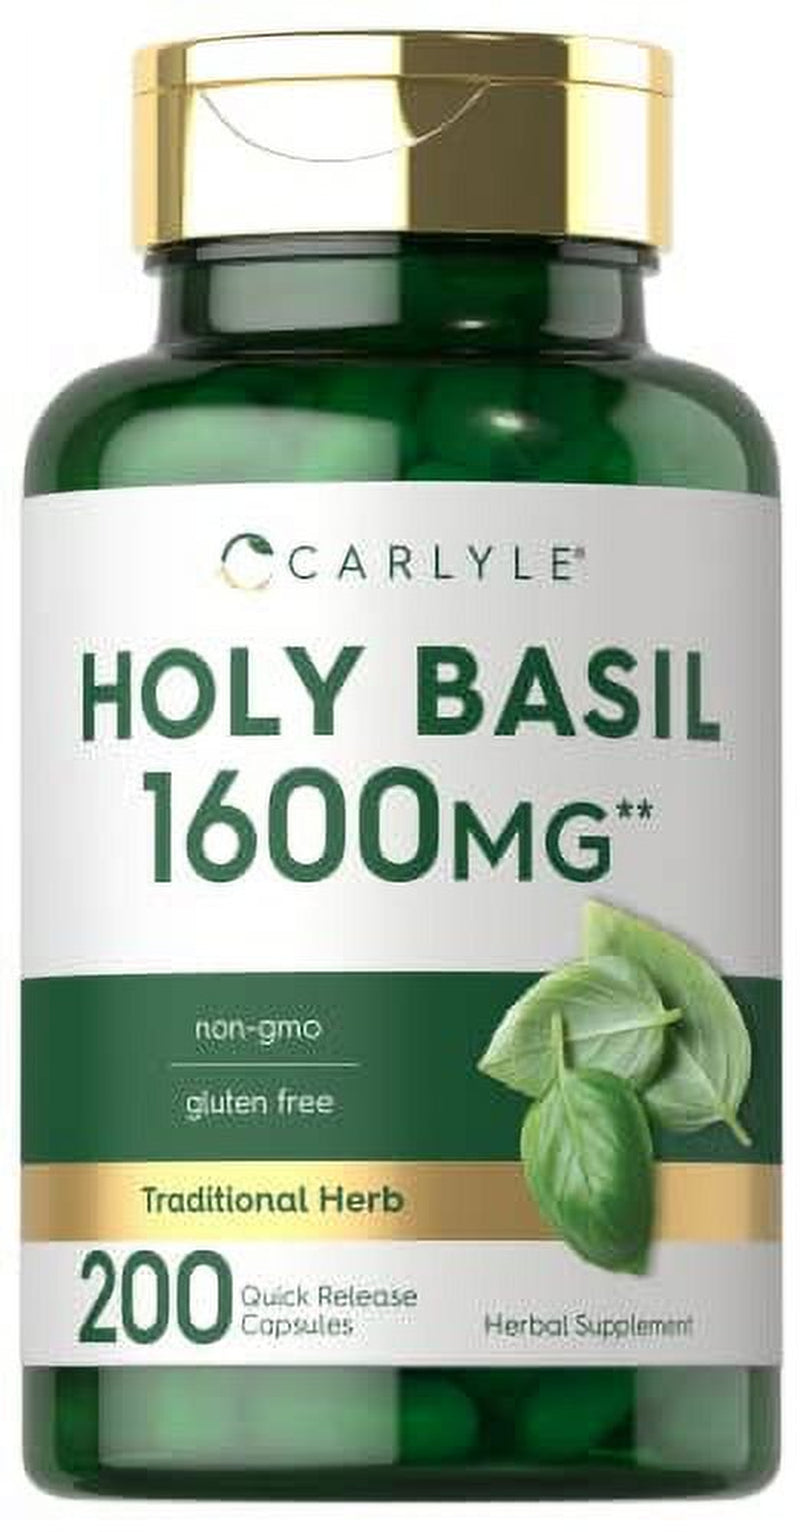 Carlyle Holy Basil 1600 Mg | 200 Capsules | Tulsi Holy Basil Leaf Extract | Herbal Supplement | Non-Gmo, Gluten Free